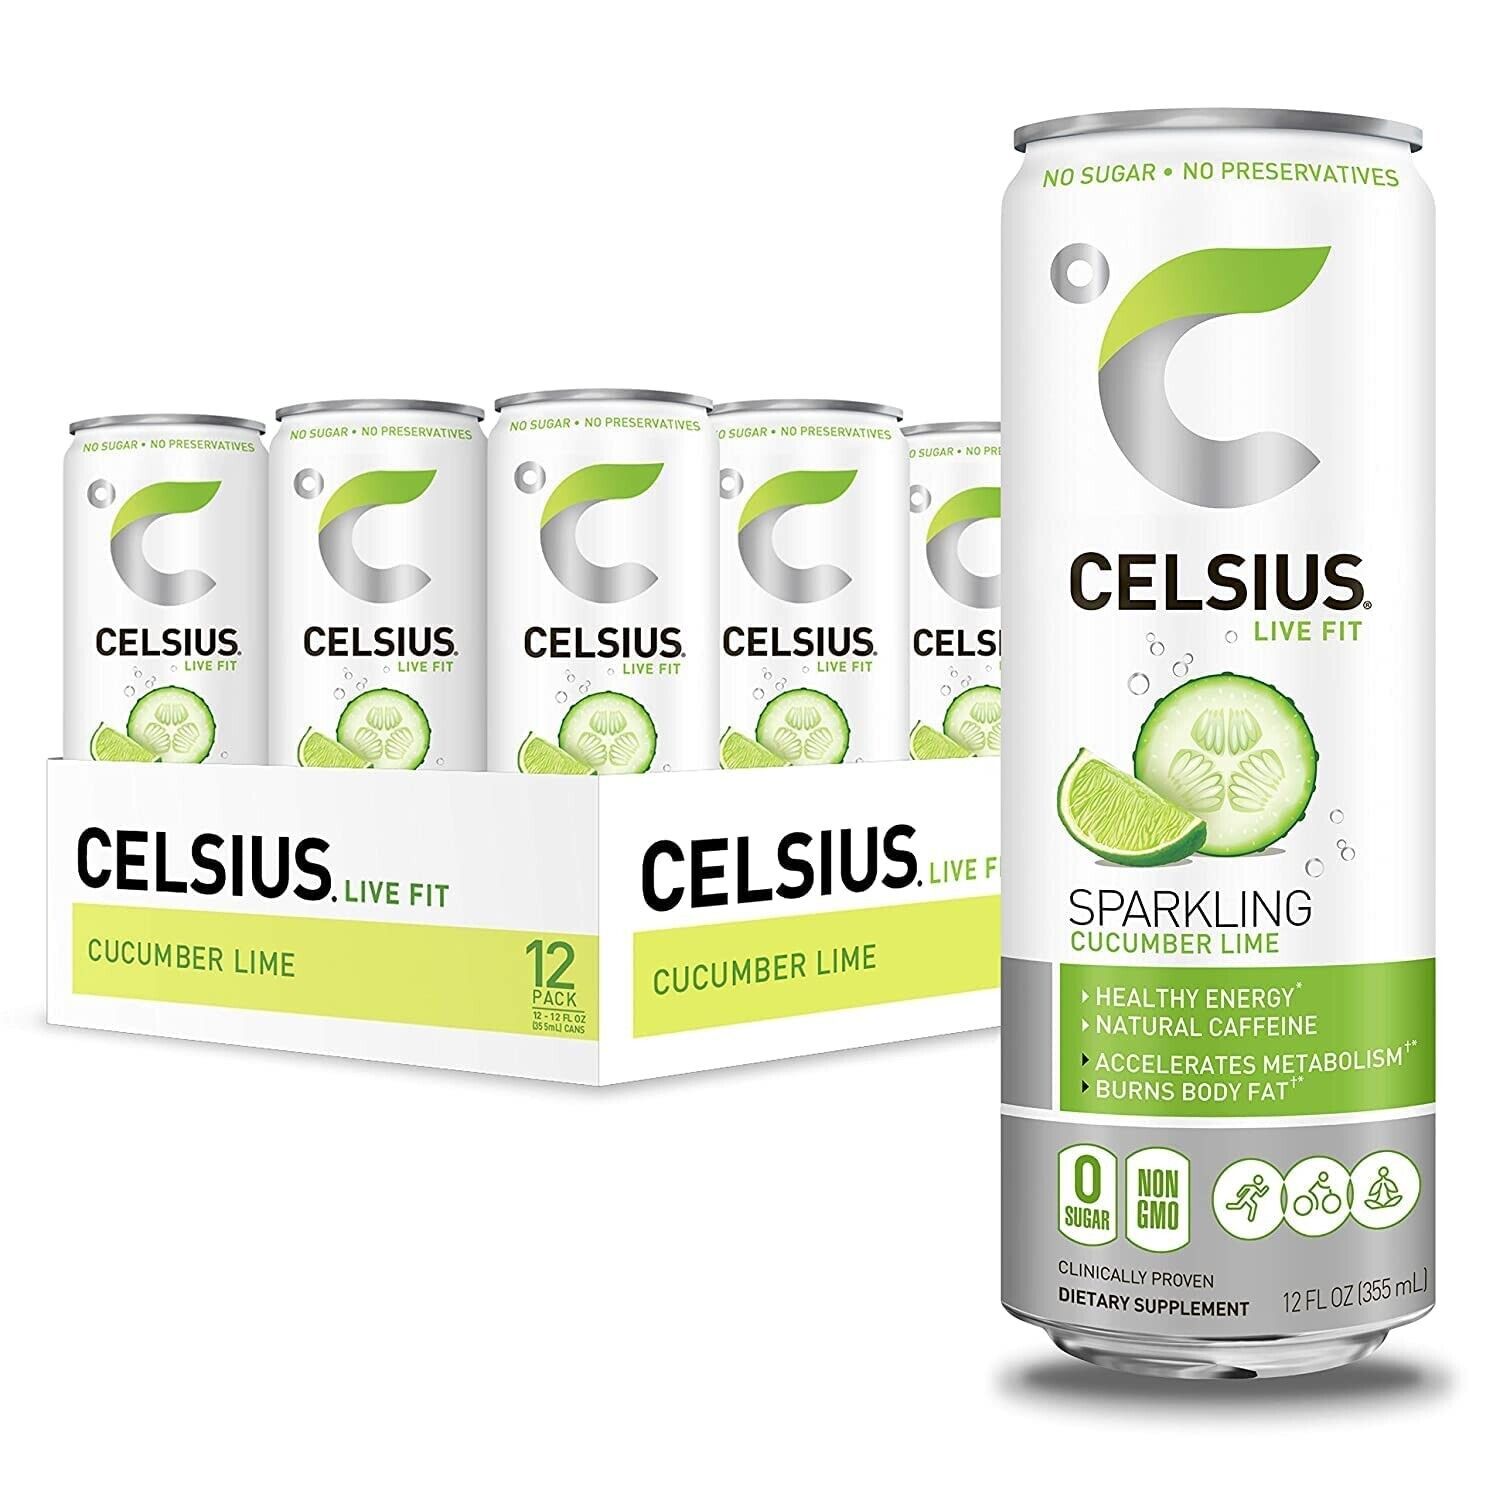 CELSIUS Sparkling Fitness Energy Drink, Zero Sugar - Cucumber Lime, (12) Cans